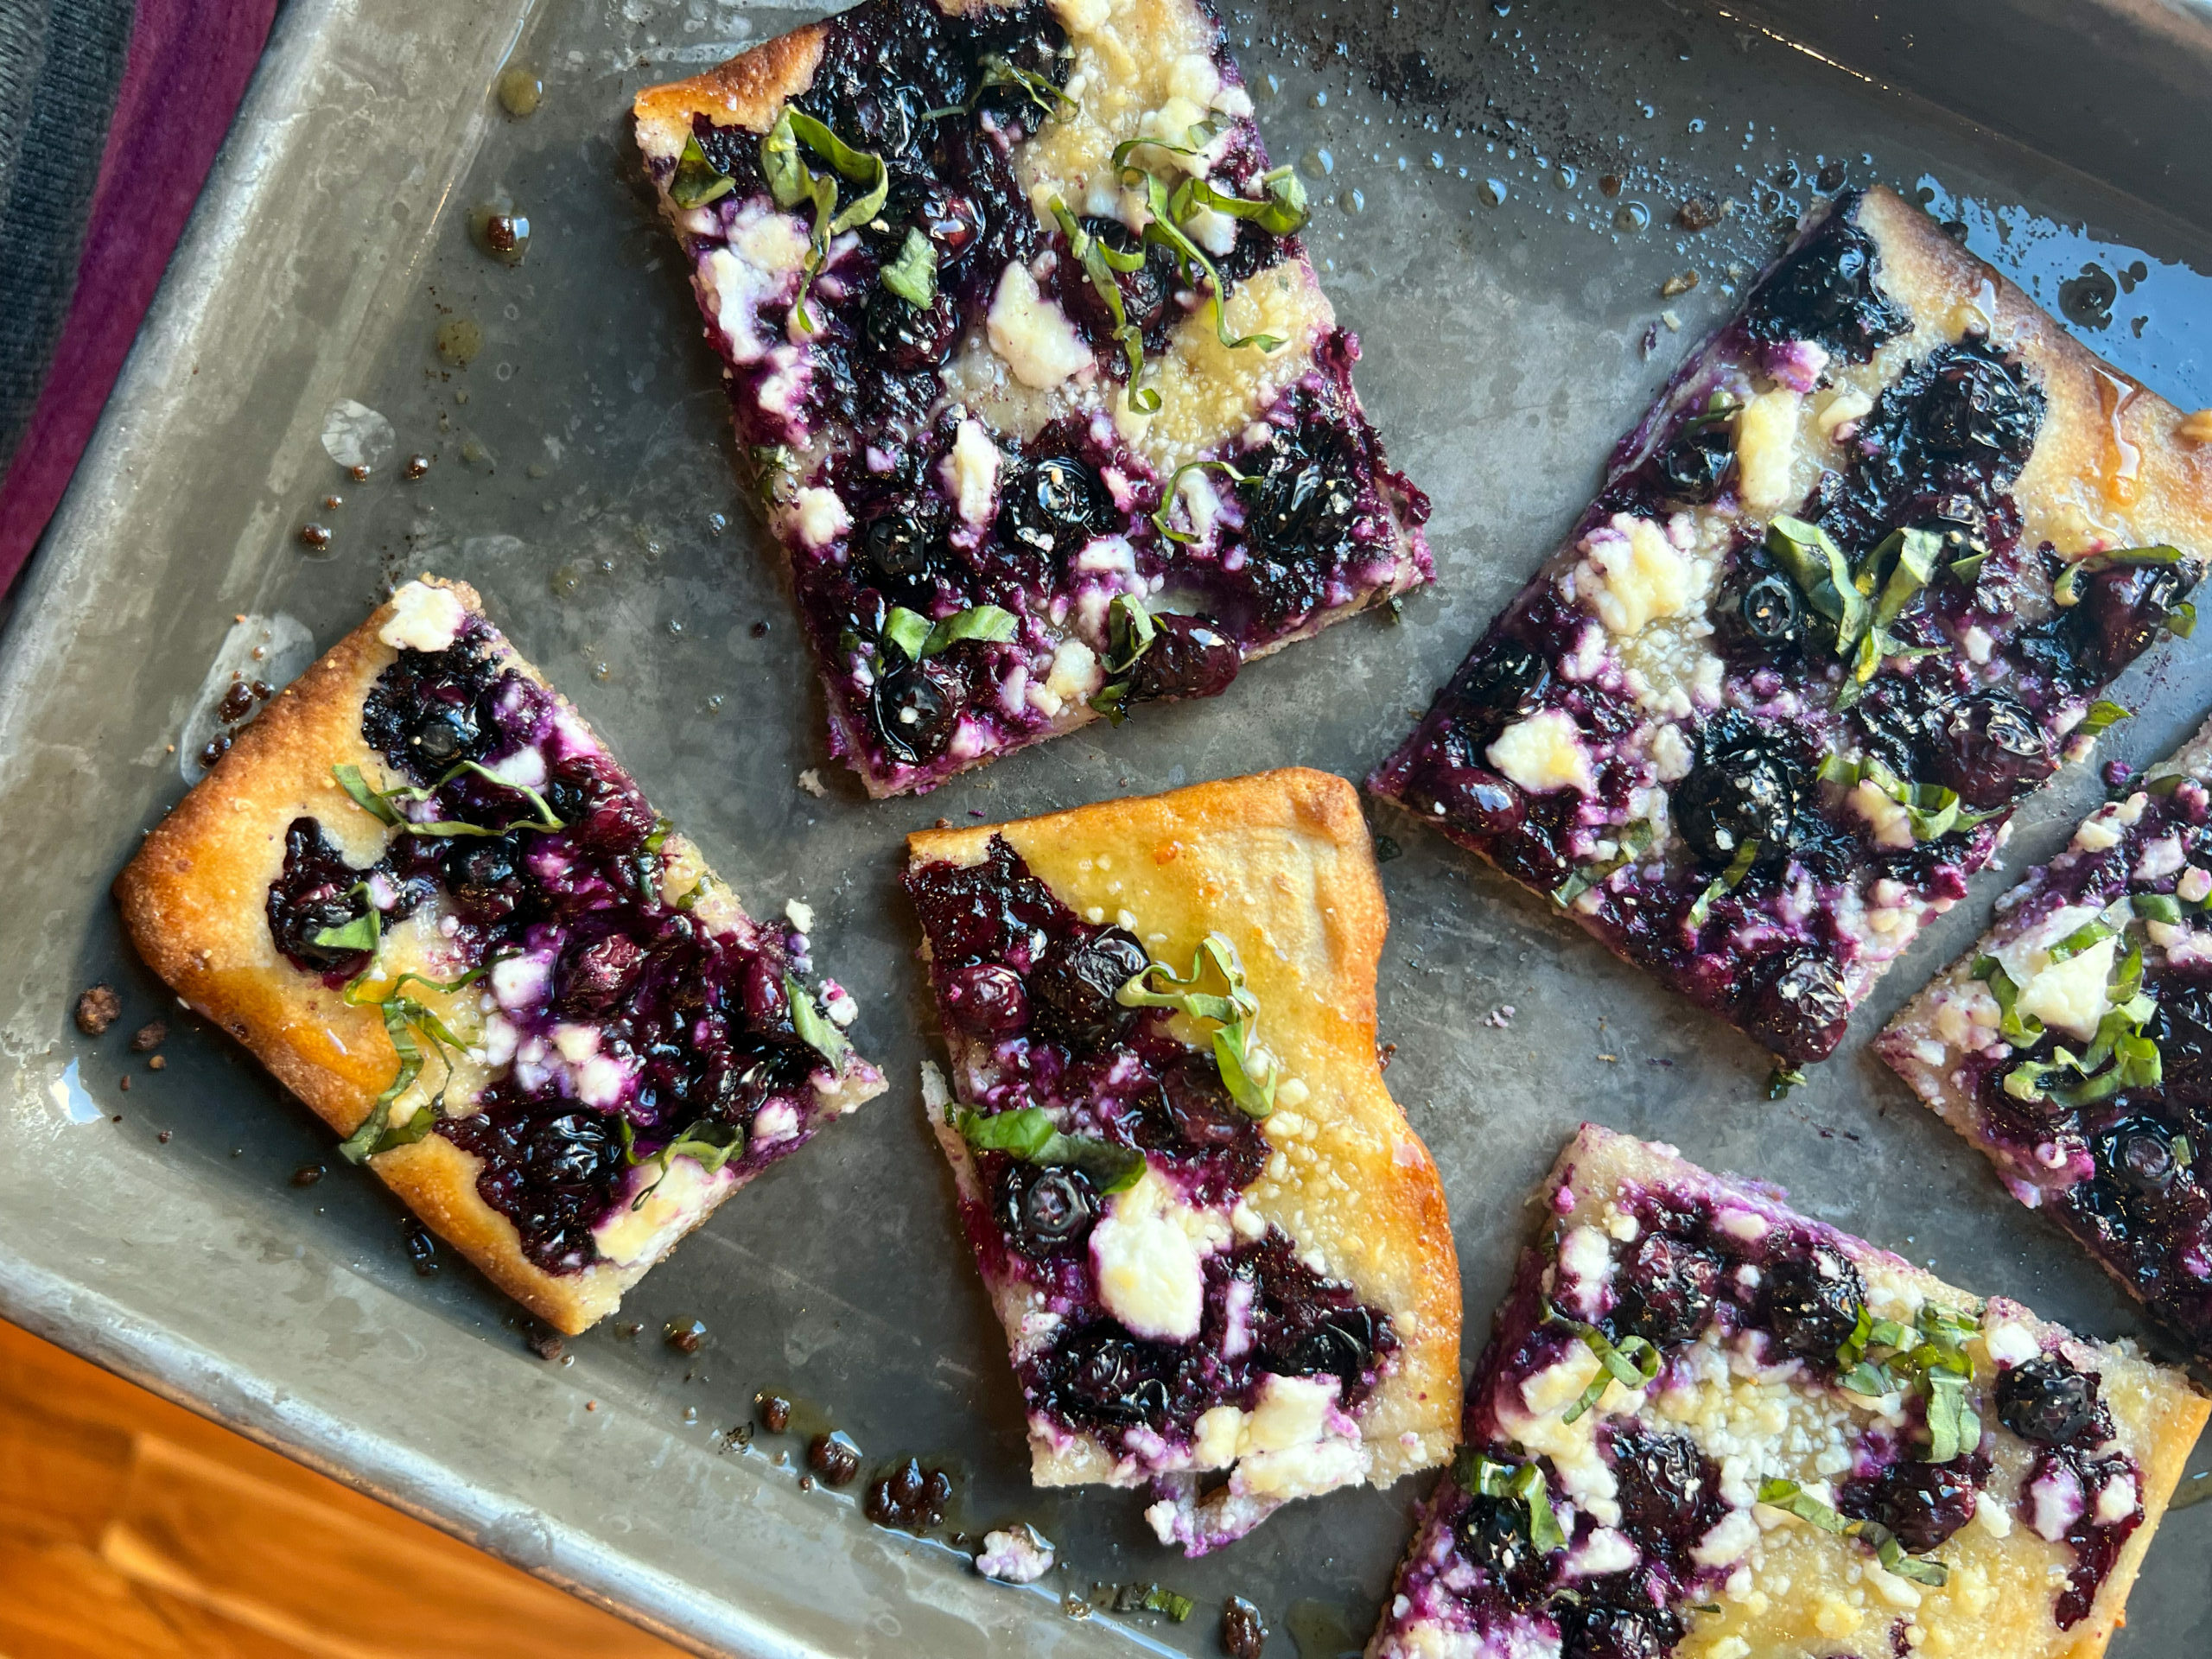 Blueberry Basil Flatbread with Honey and Goat Cheese